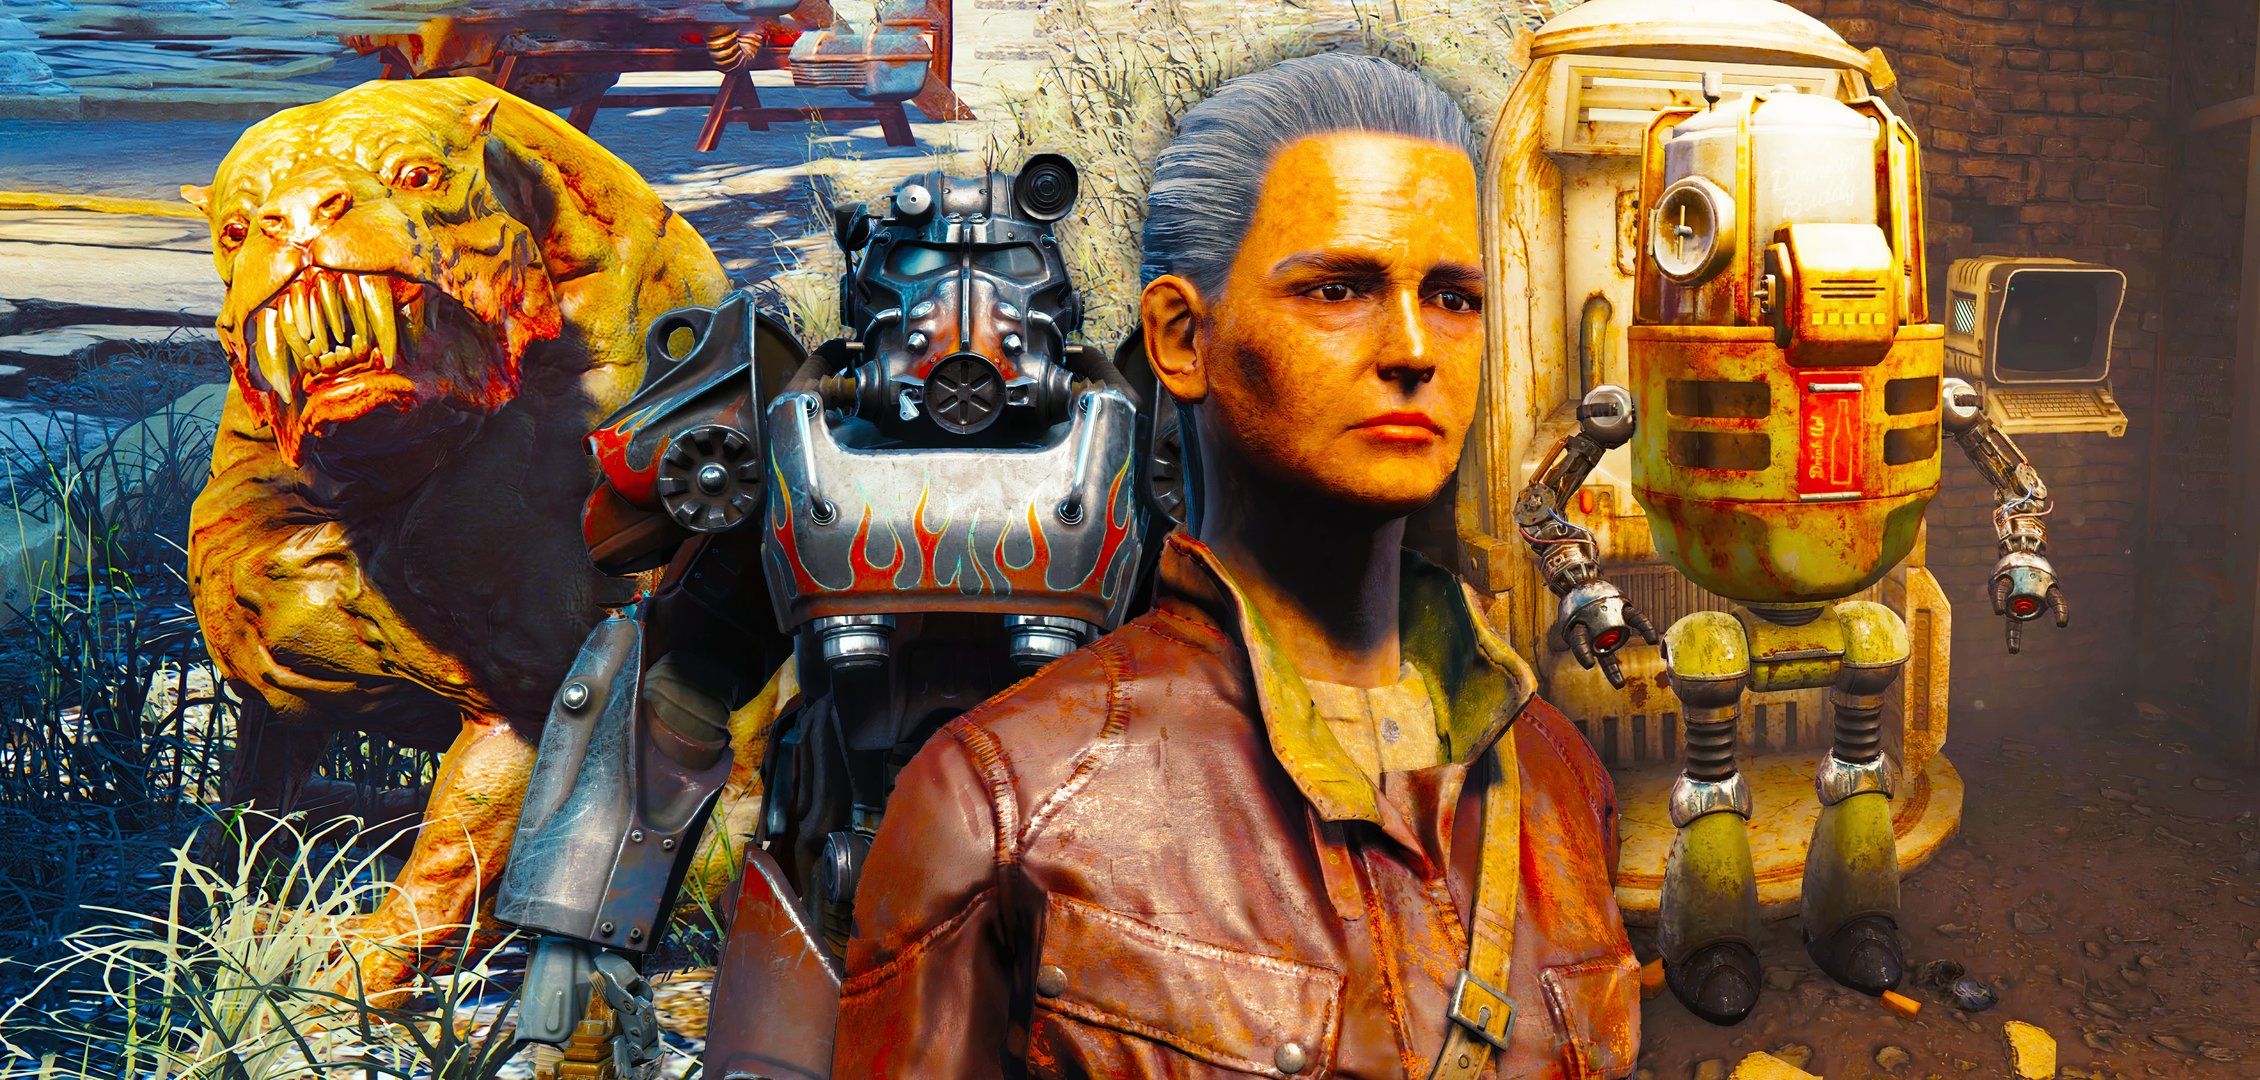 Gracie, Doc Anderson, Drinkin' Buddy and a player in power armor from Fallout 4